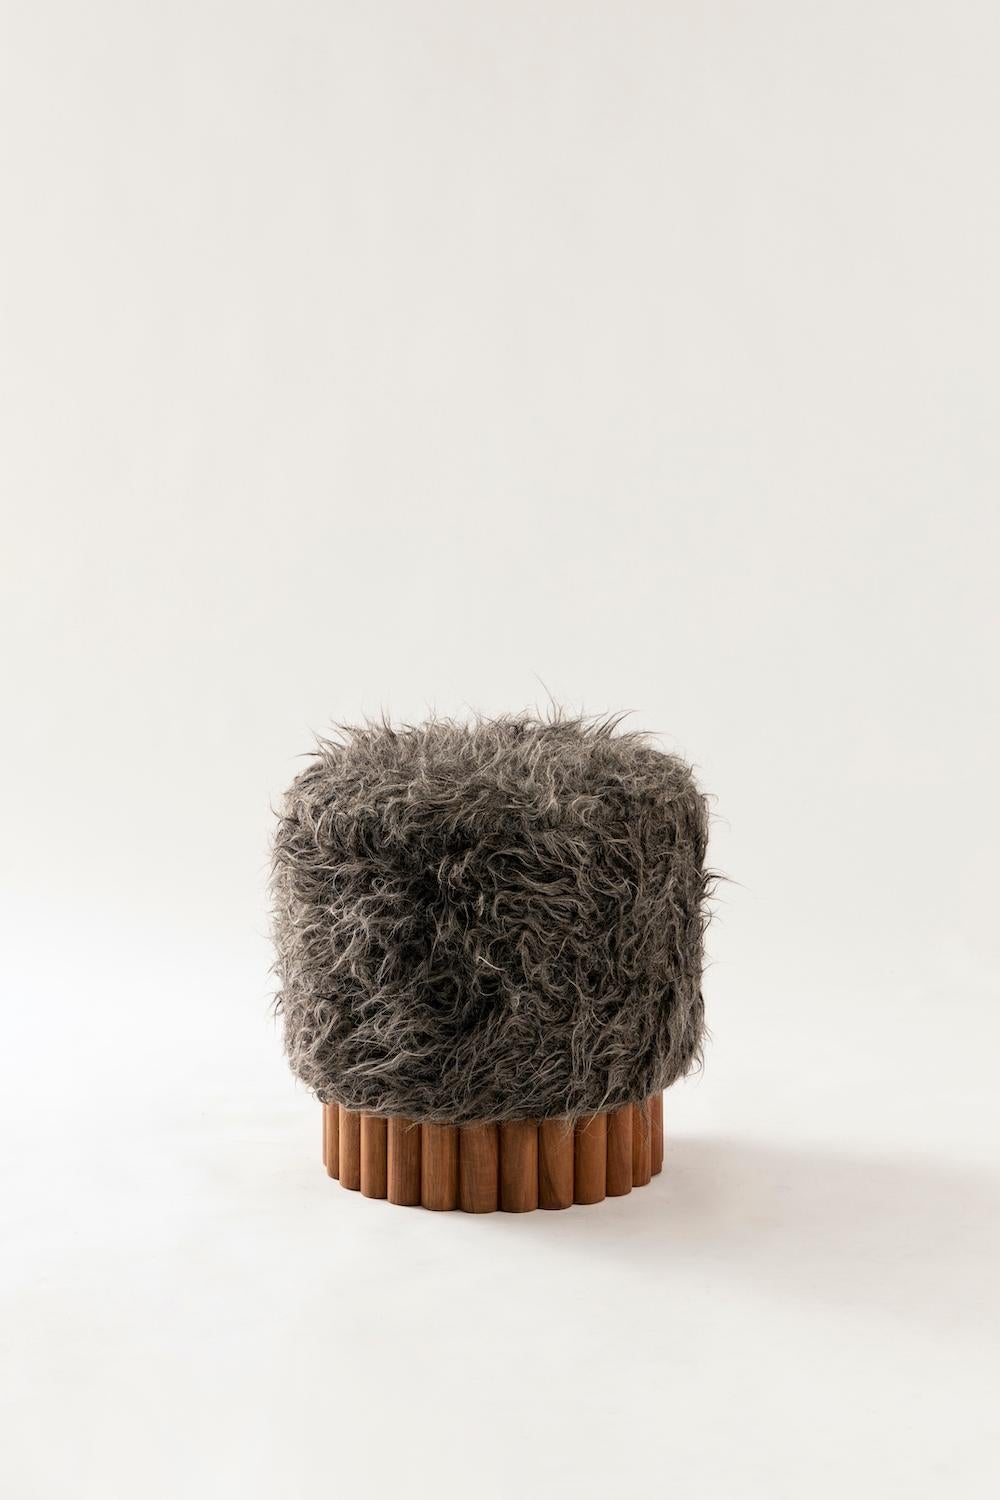 Mexican LOTO Pouf in Gray Long Pile Shag Wool by Peca For Sale